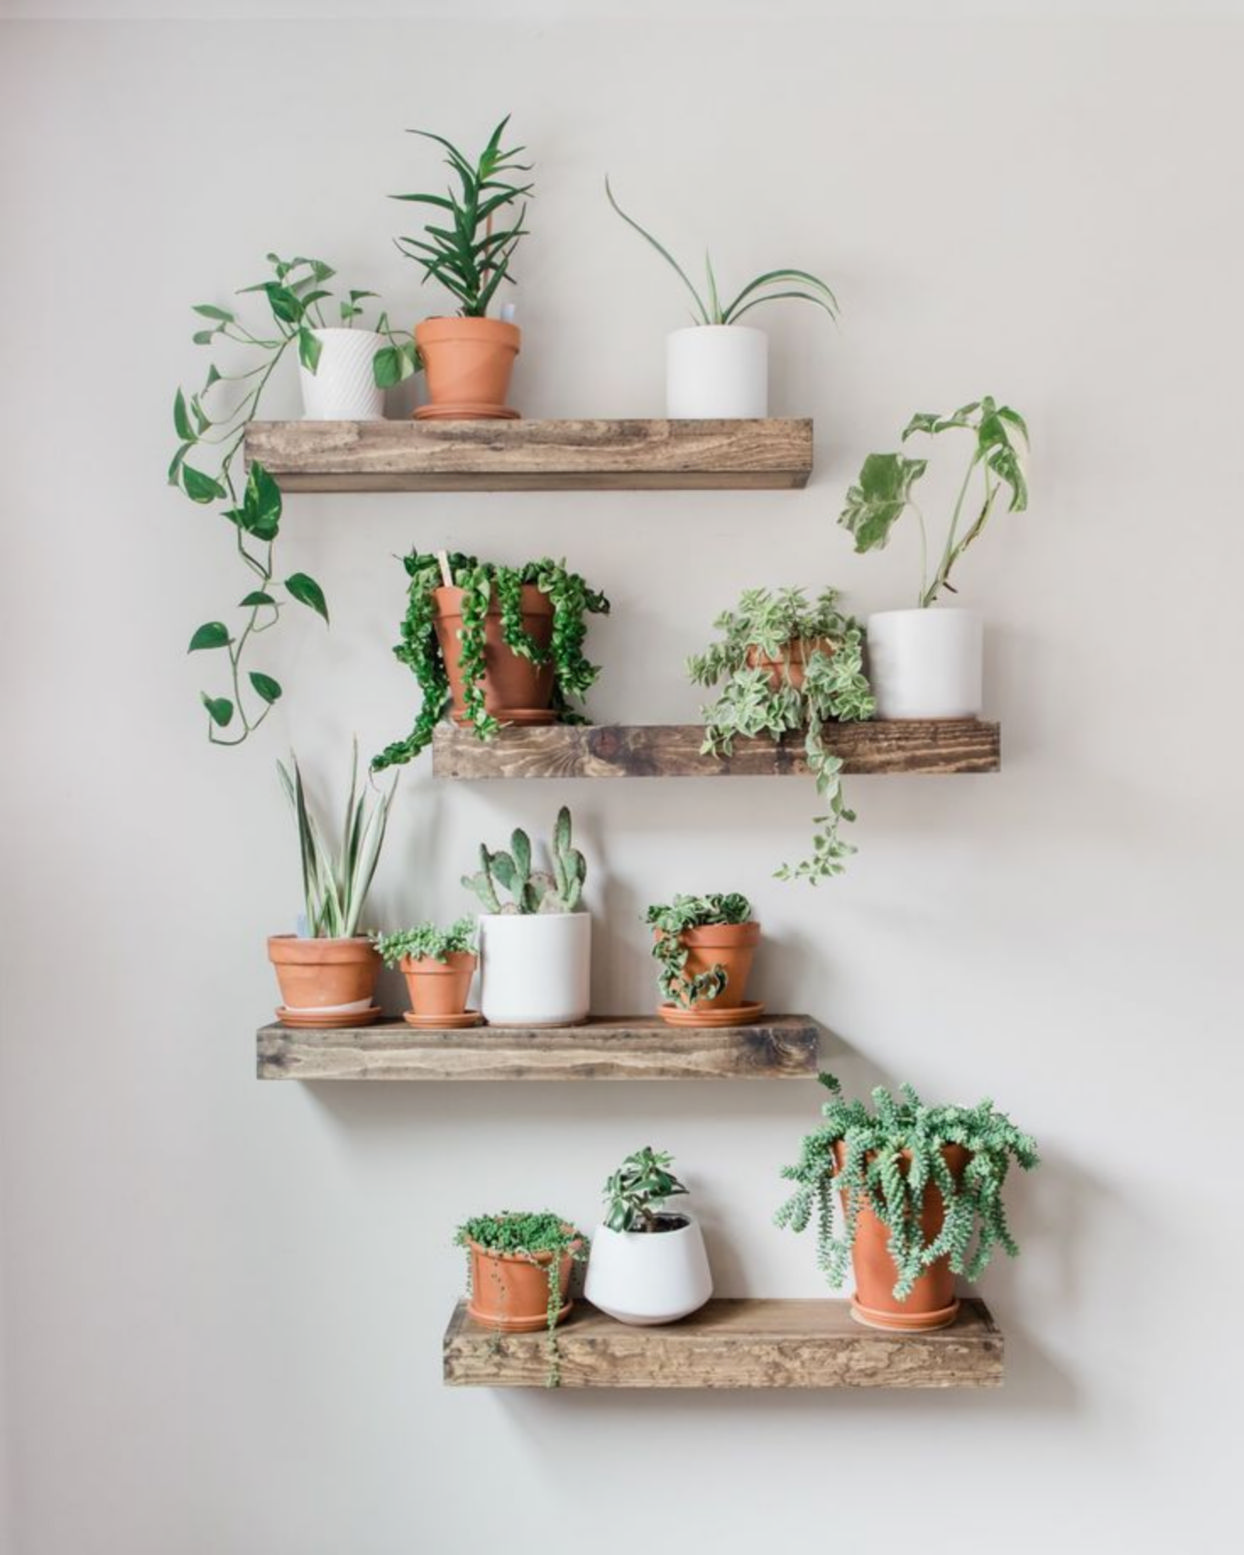 Beautiful plant wall decor ideas to upgrade your room from wall decor shopping online 1